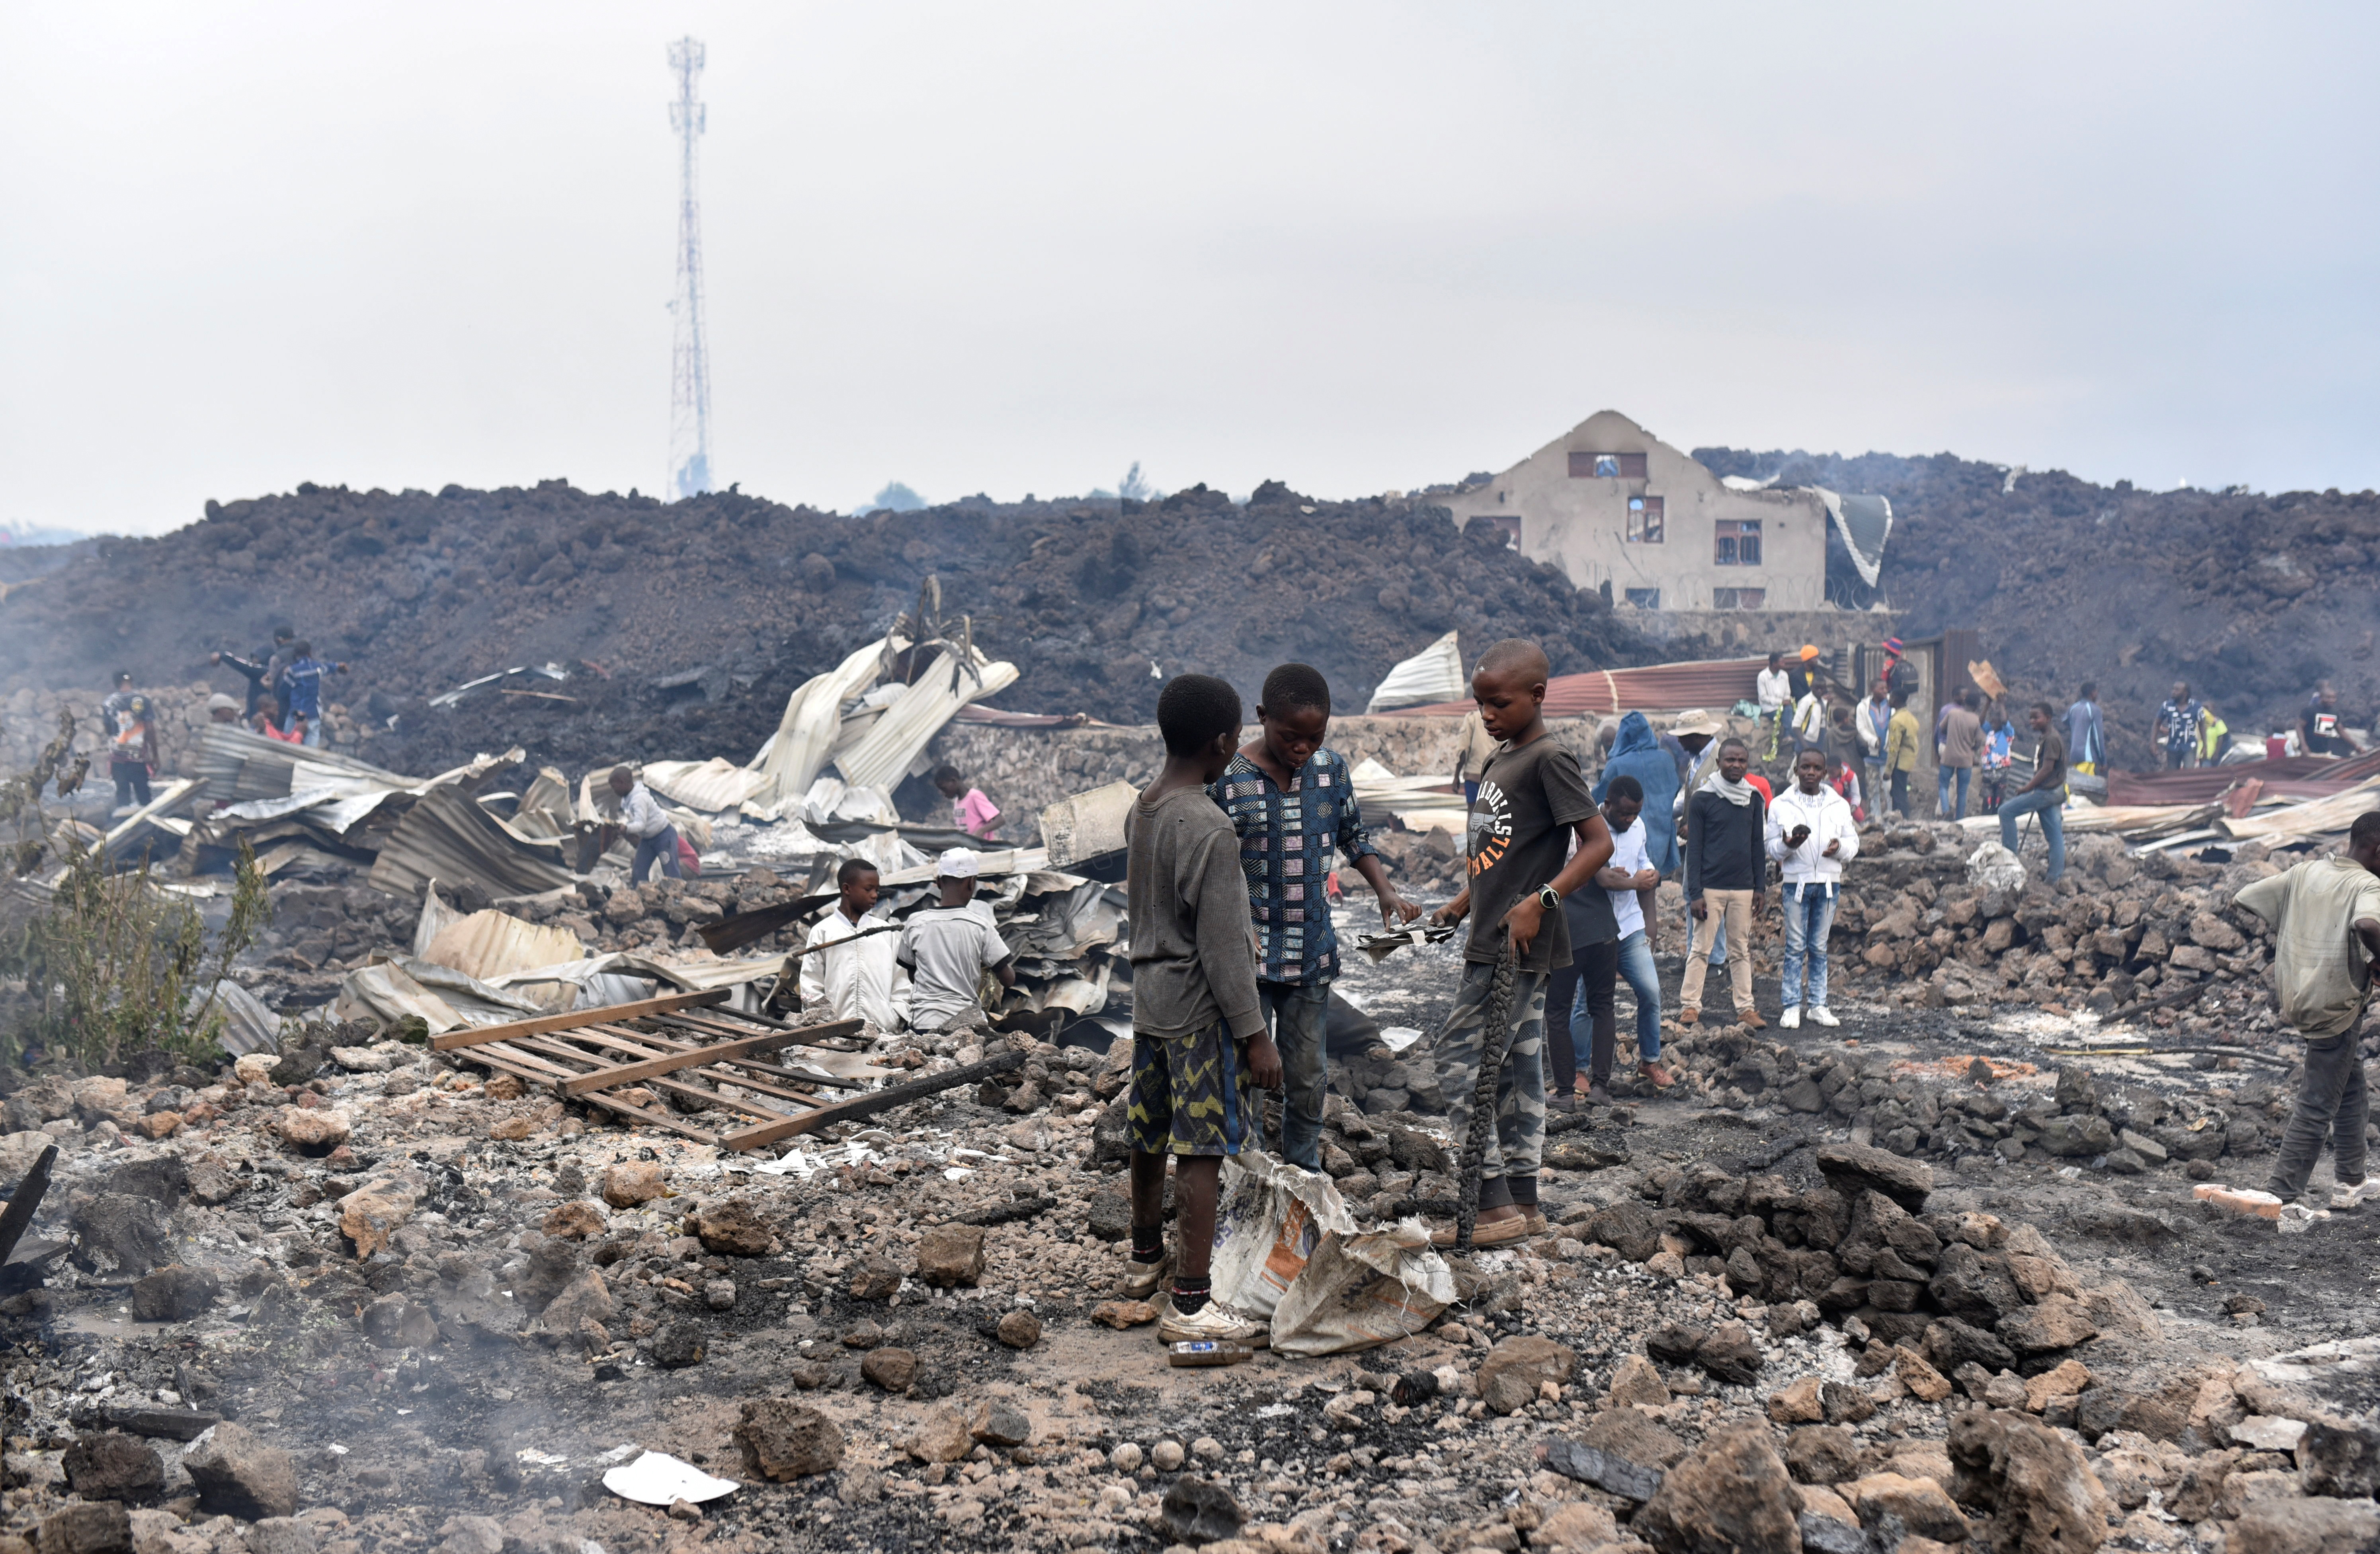 Residents pick up remains of their destroyed homes from the smouldering lava deposited by the eruption of Mount Nyiragongo volcano near Goma